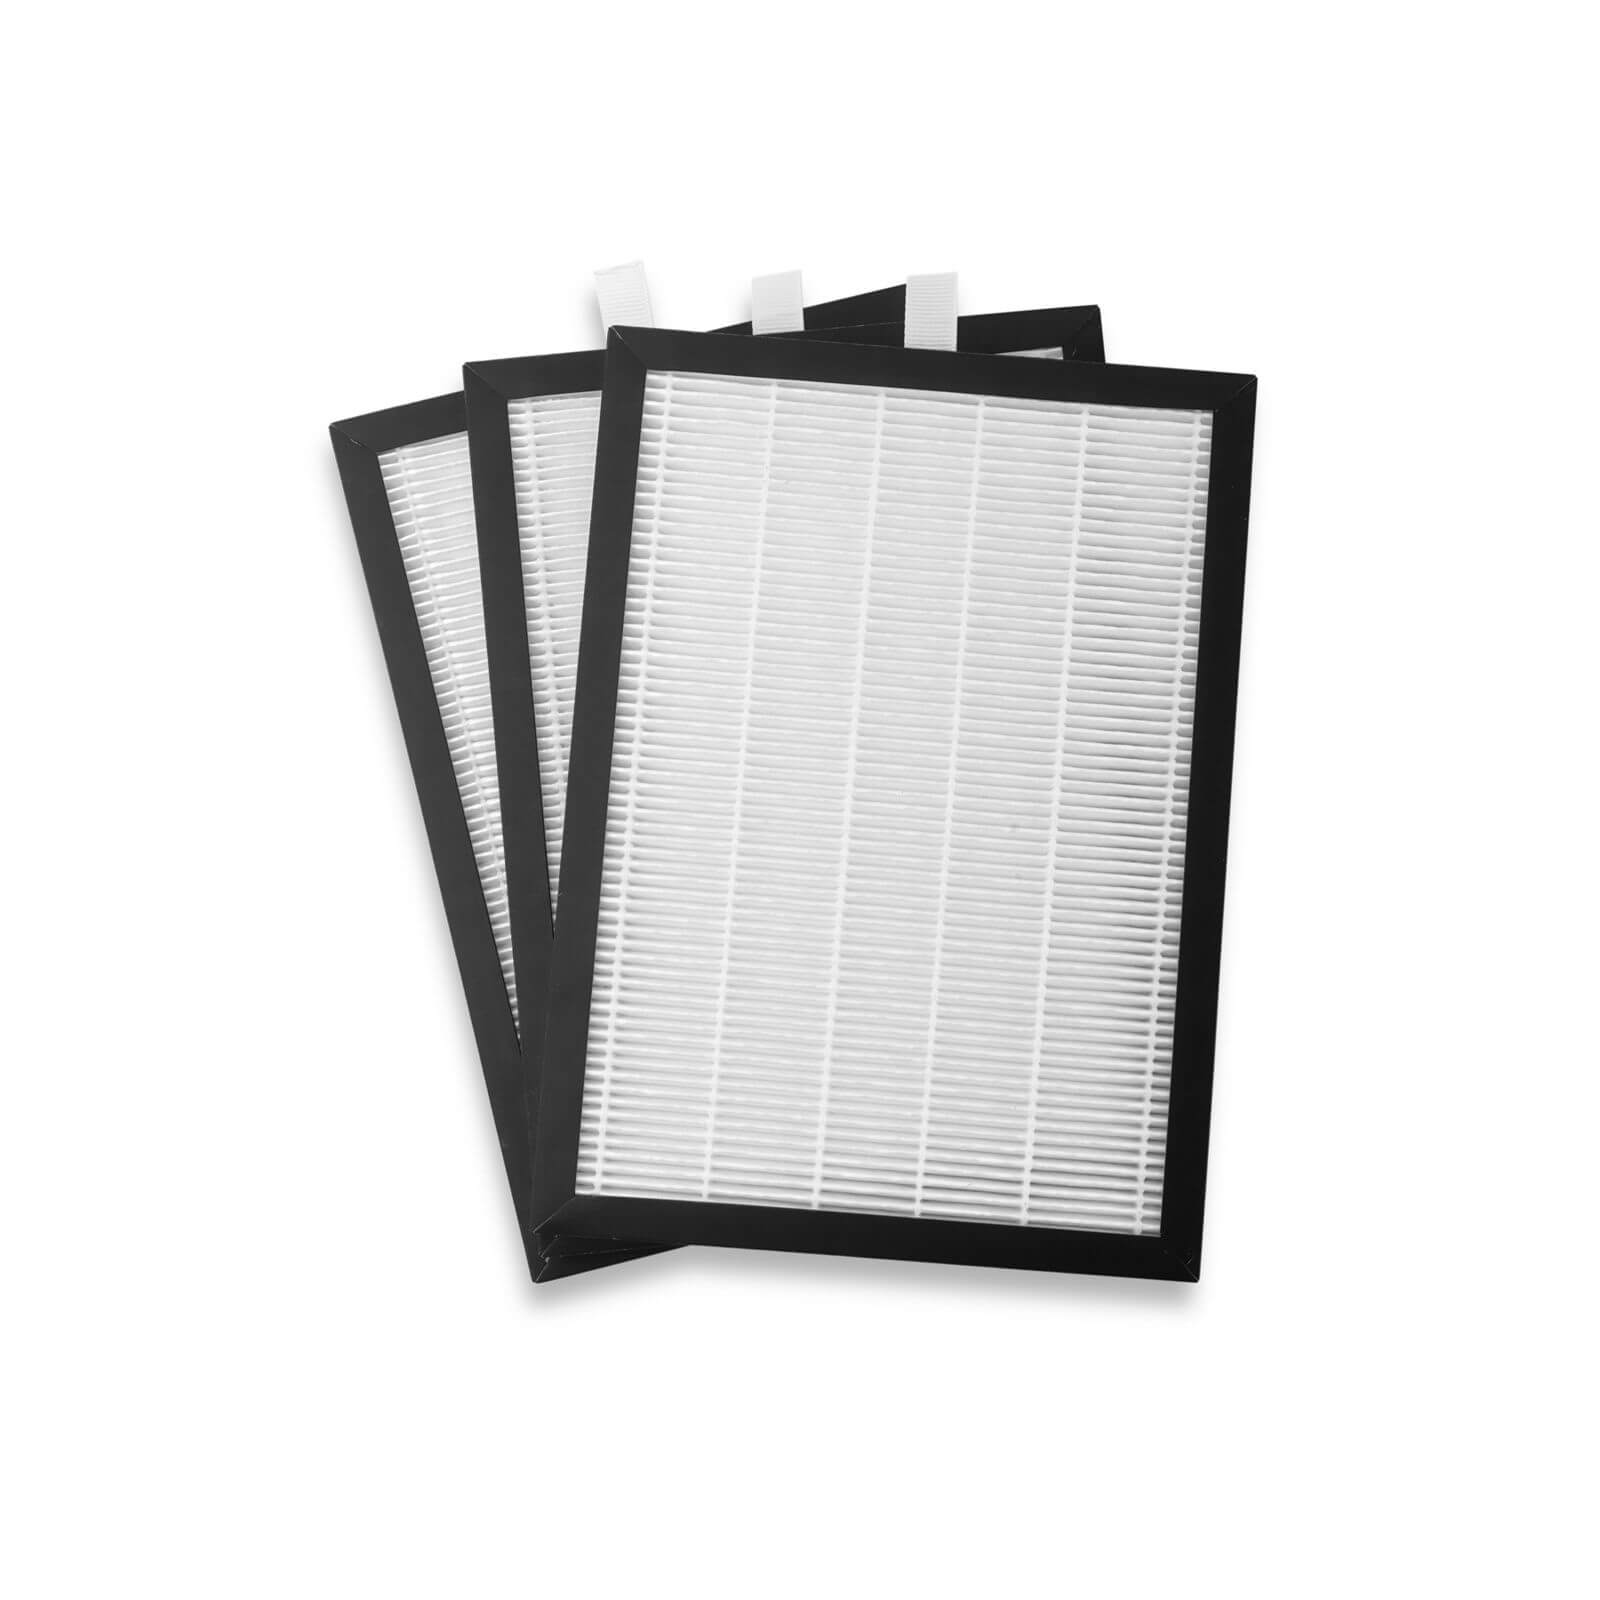 Photo of Meaco 20l Hepa Filter - 3 Pack